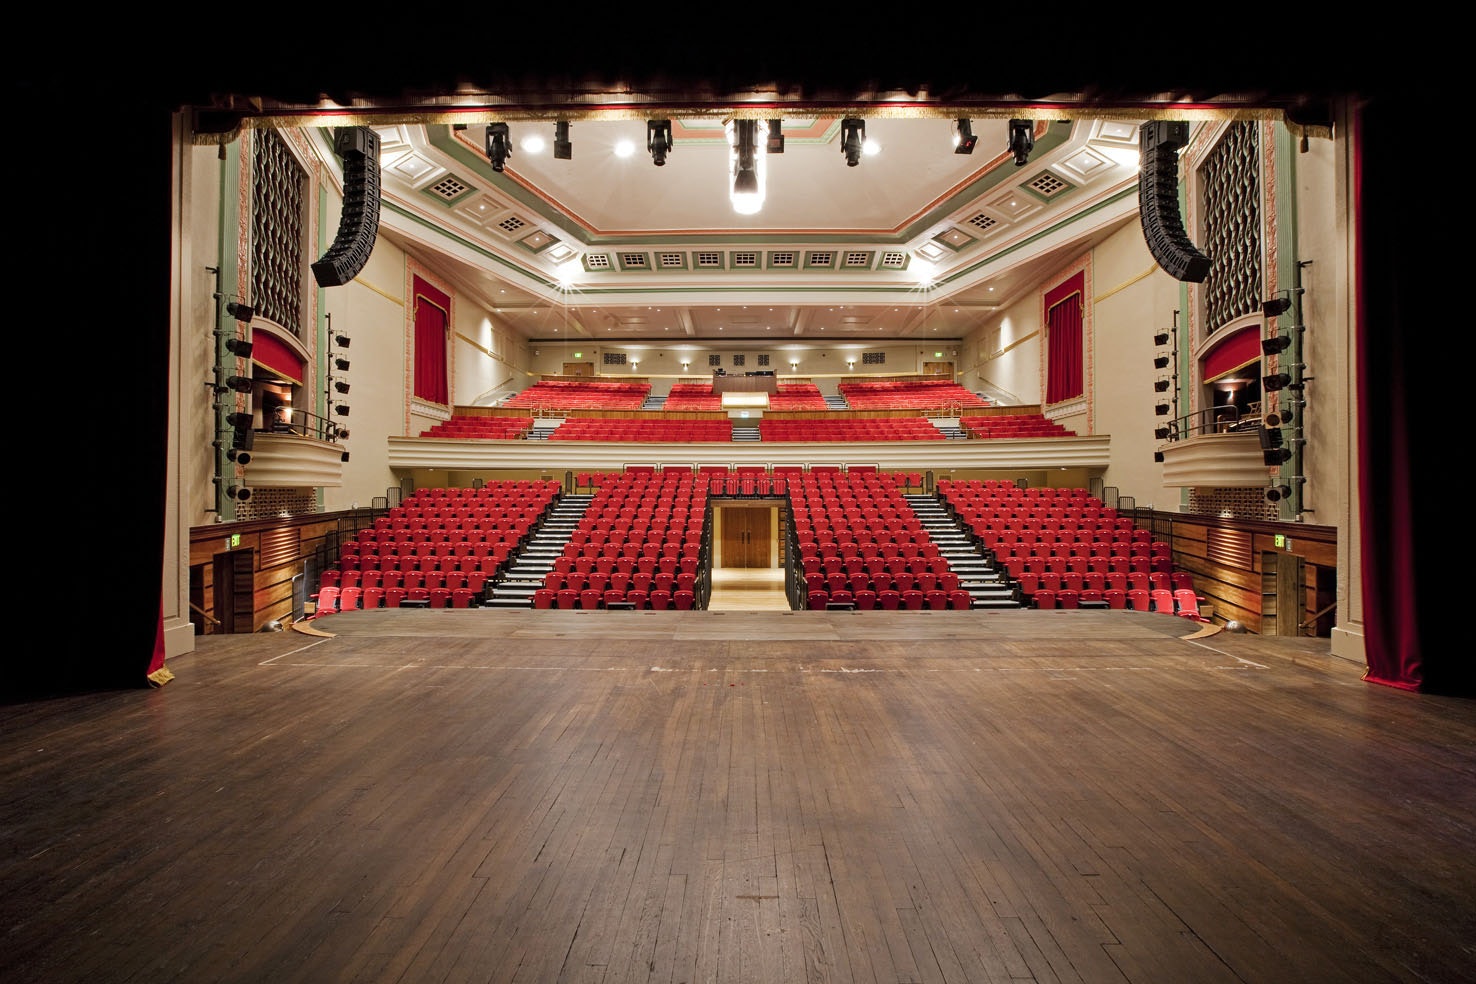 The People's Palace - Queen Mary Venues - The Great Hall Theatre image 3